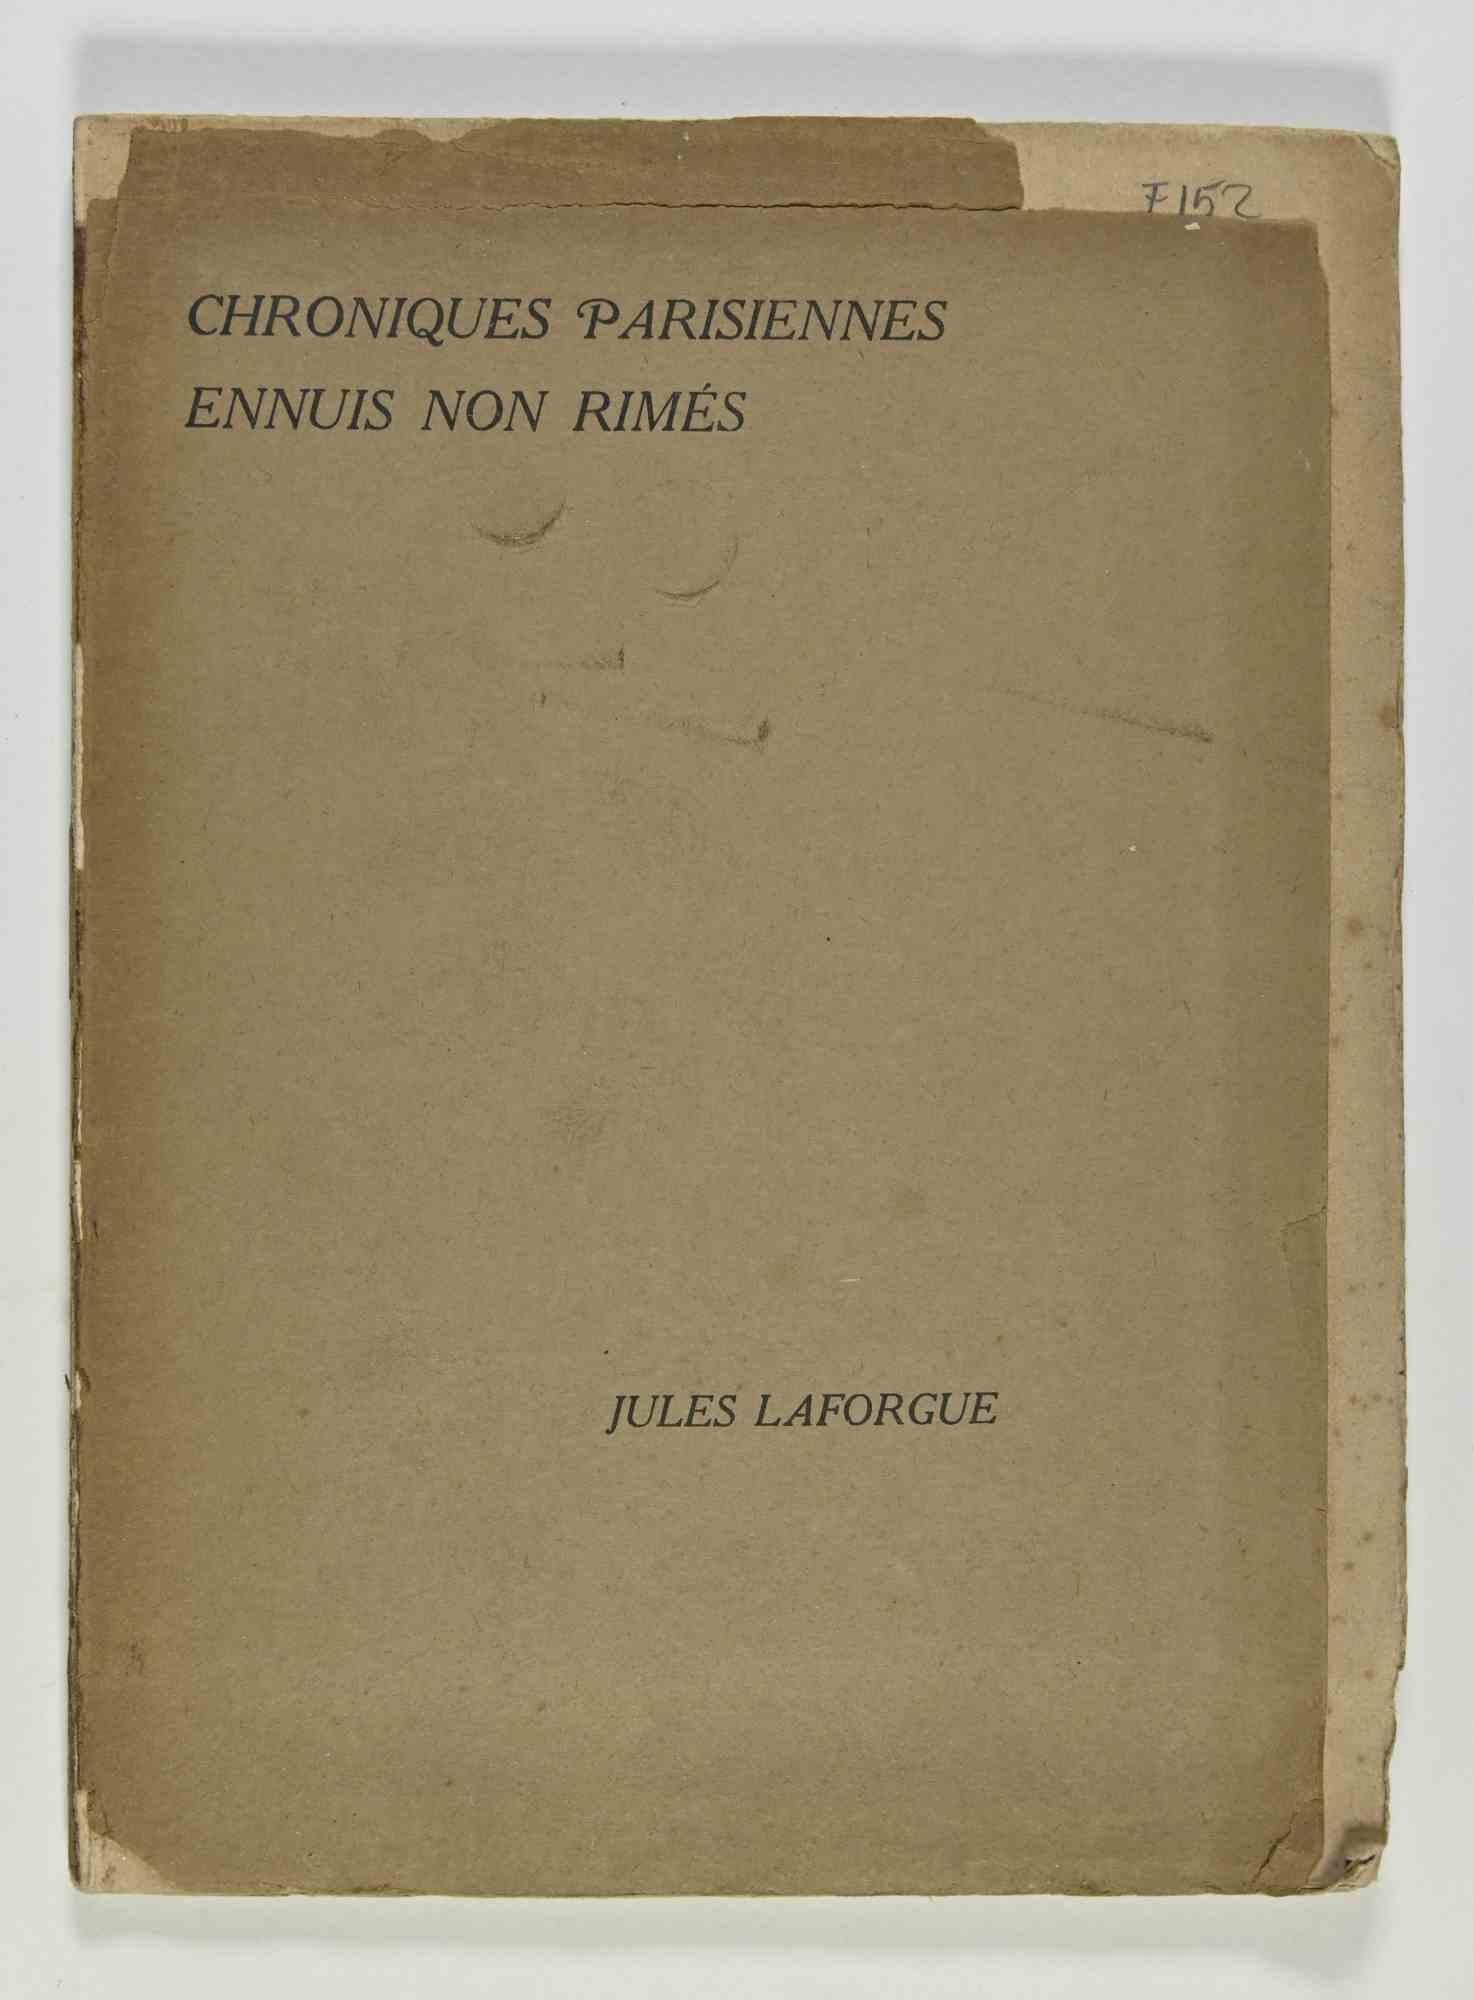 Chroniques parisiennes ennuis non rimès is a book written by Jules Laforgue.

22 x 16 cm.

On the second page it is written that Jules Laforgue's unpublished texts were collected by Sifnro Andrè Malraux.

Printed by the publishing house La